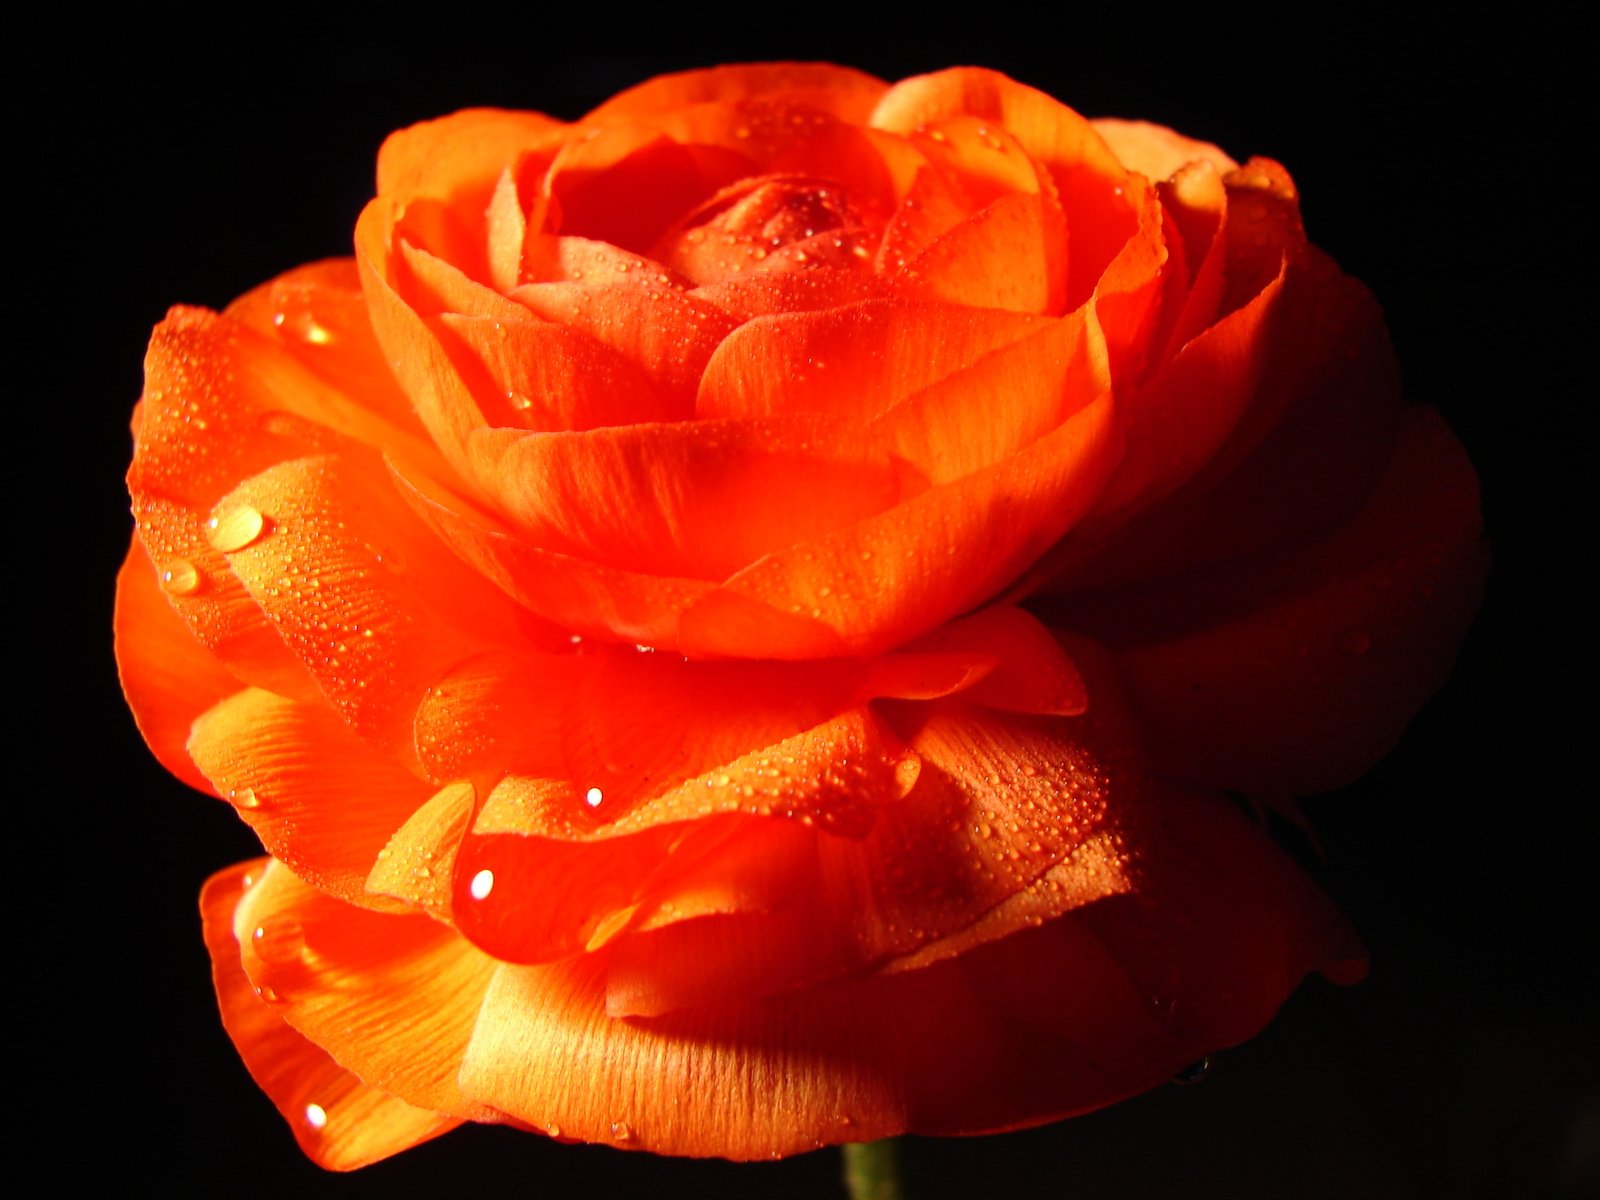 orange rose is pographed with its dew drops